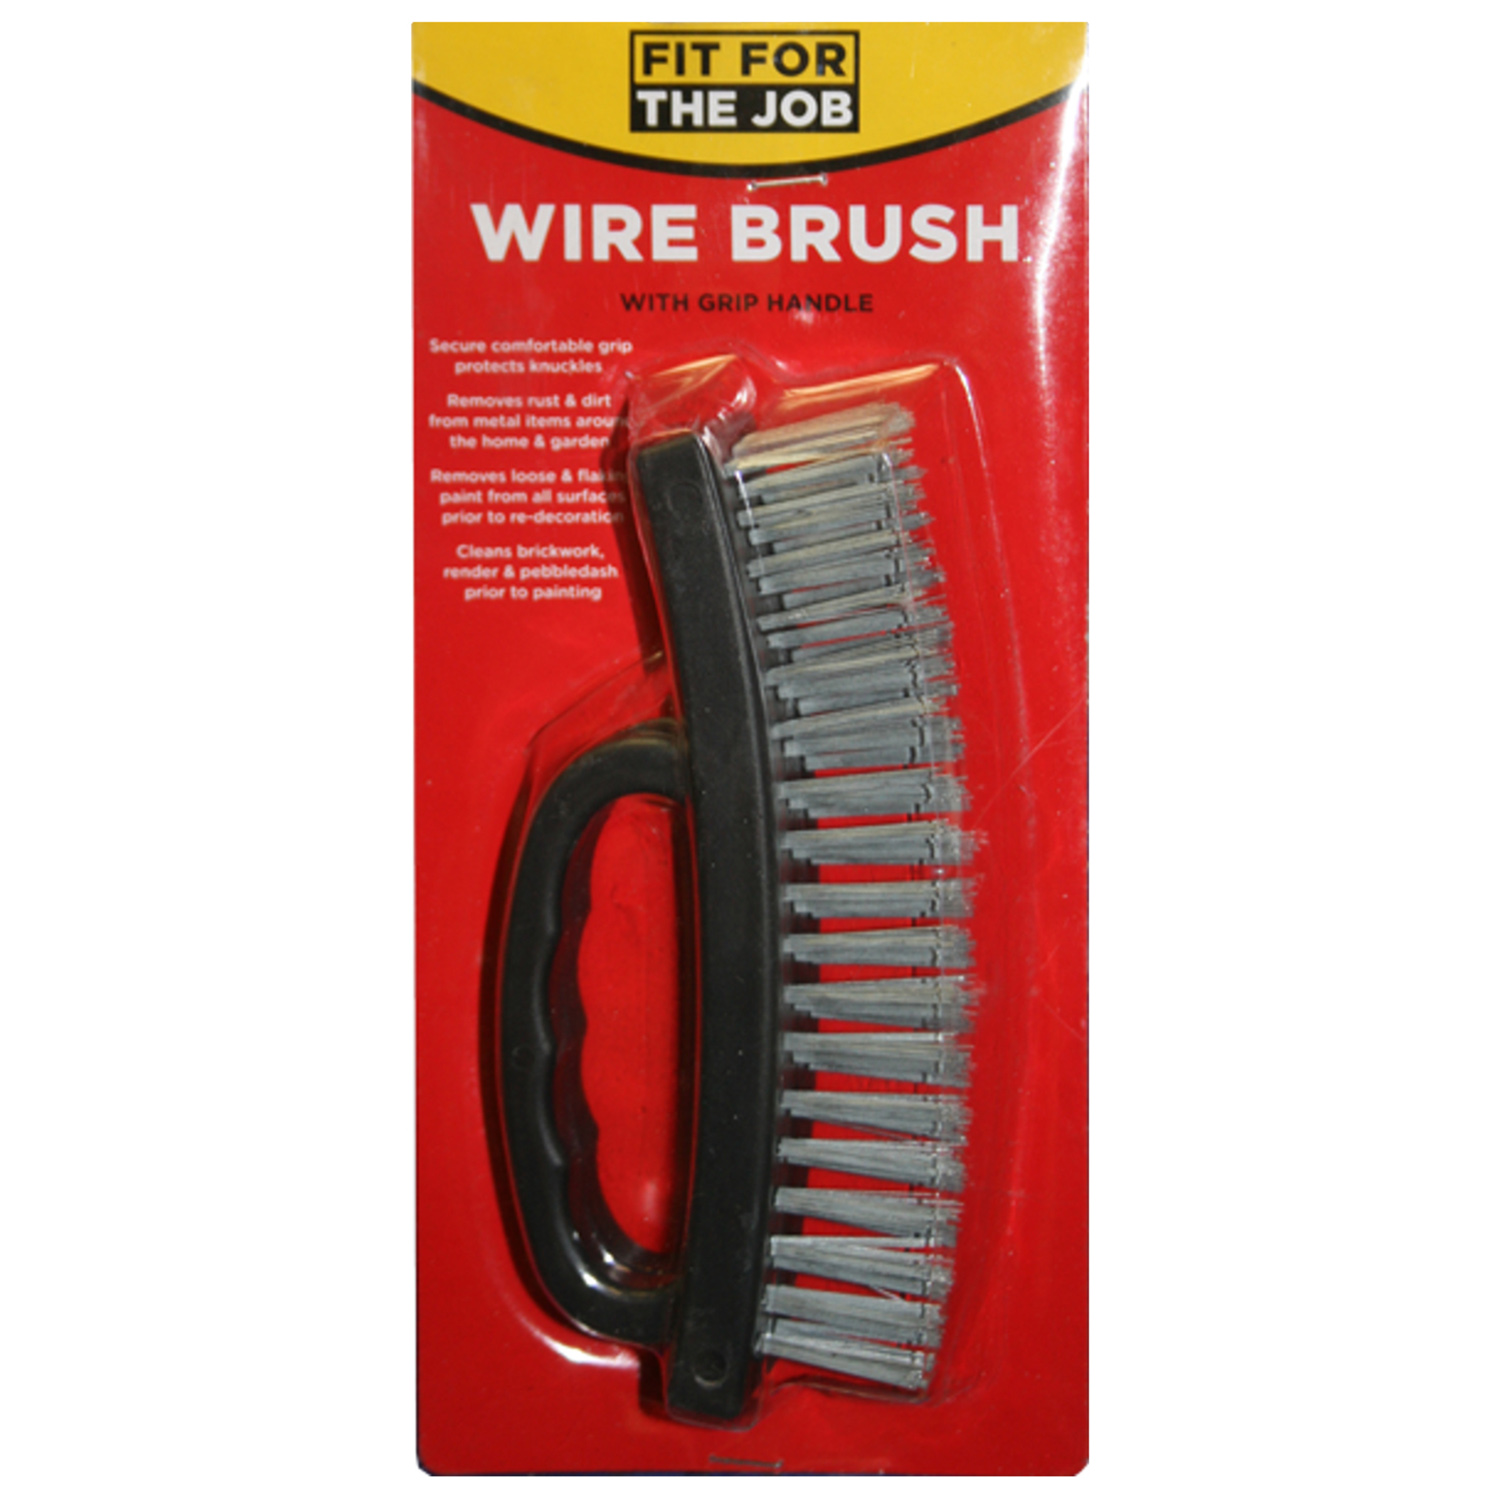 Fit For The Job Overgrip Wire Brush Image